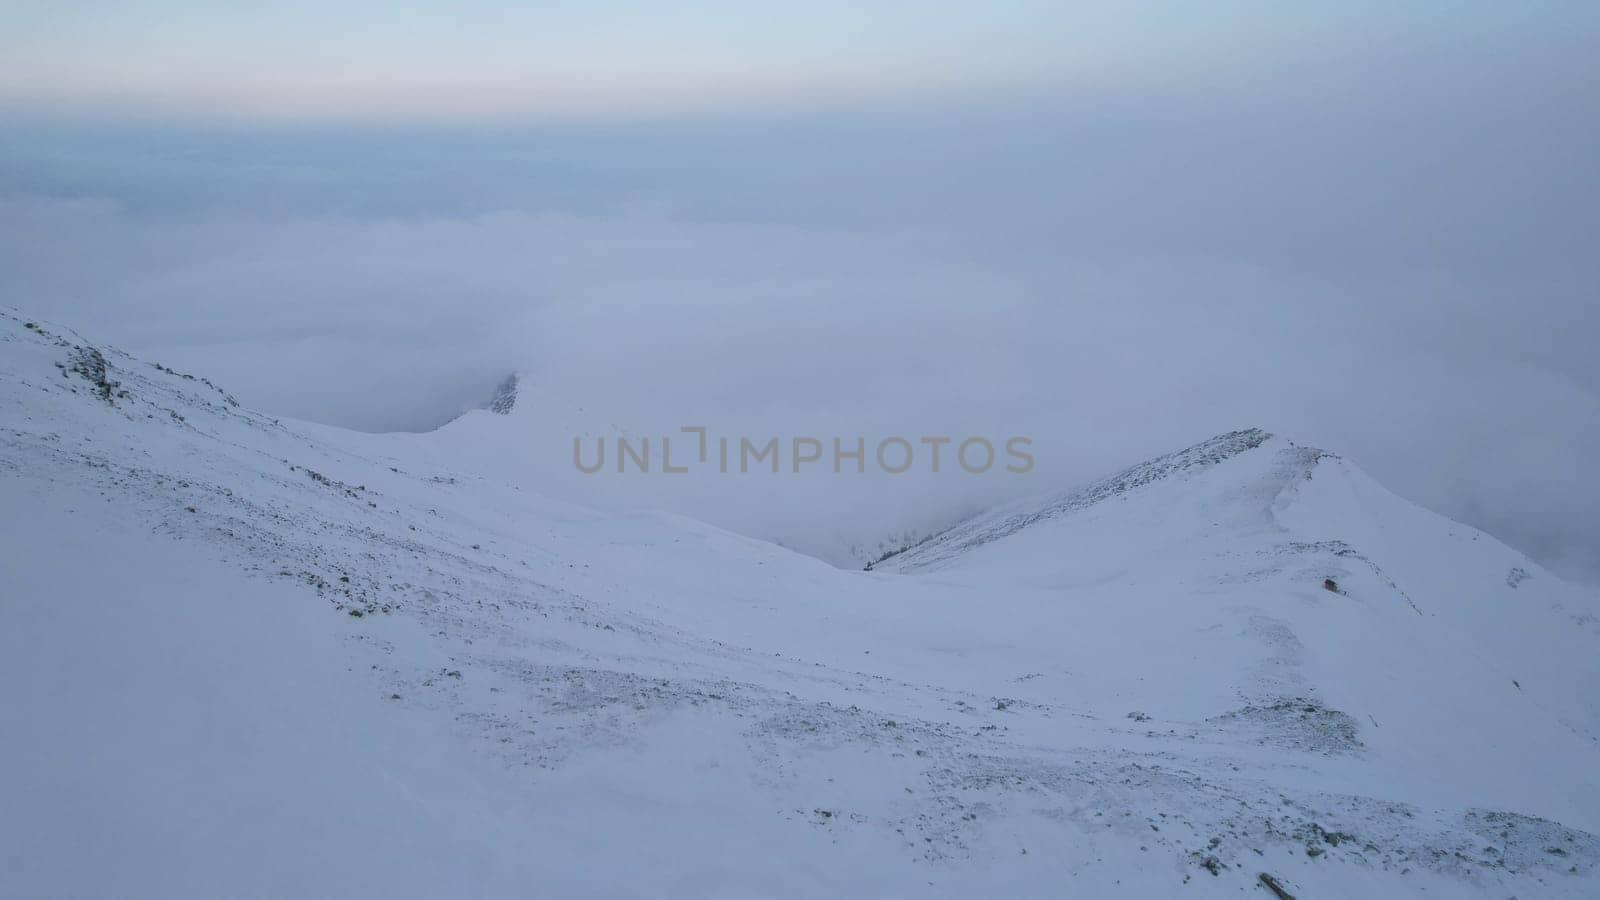 Mystical dawn with clouds in snowy mountains. The white hills are covered with clouds and snow. Steep rocky cliffs. The high peaks of the peaks. The rays of the sun at dawn pass through the clouds